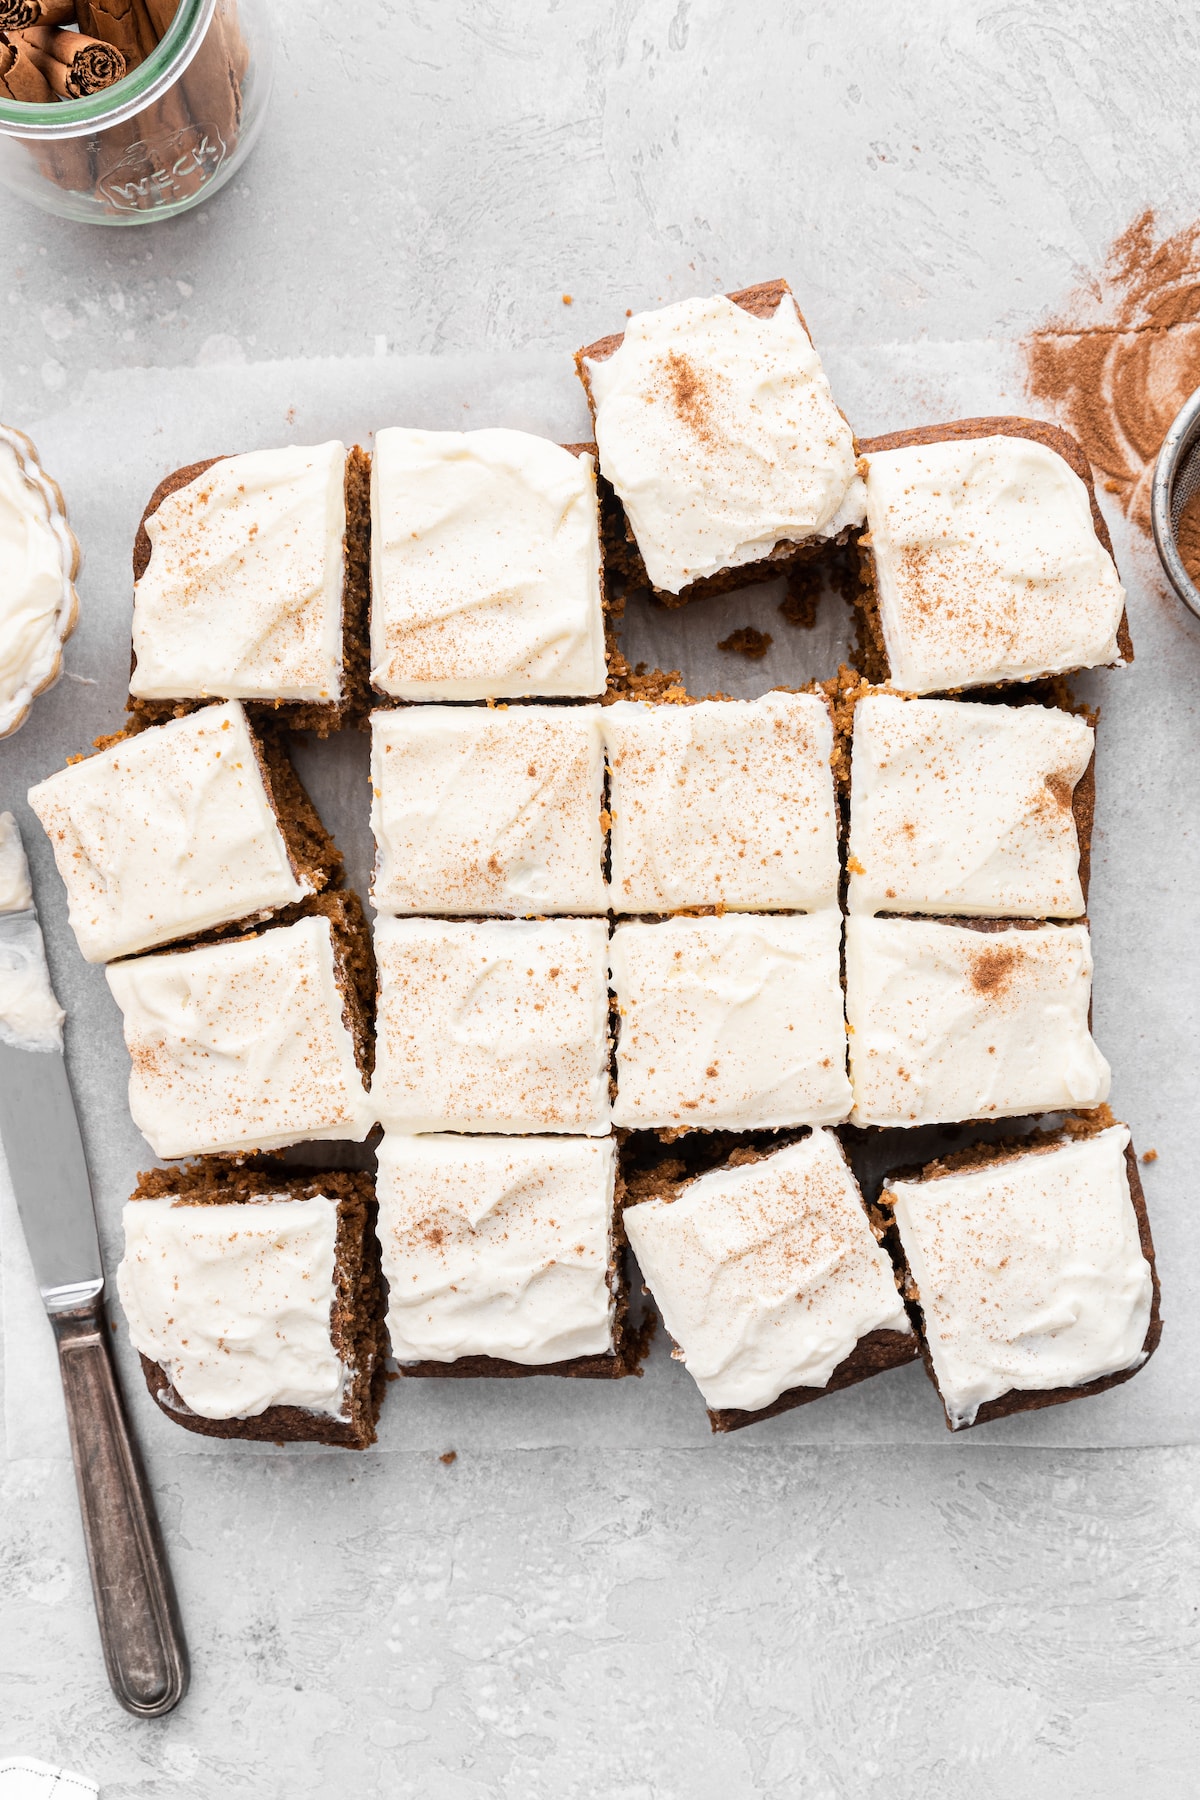 Pumpkin cake sliced into cube-shaped pieces topped with a cream cheese frosting on parchment paper.